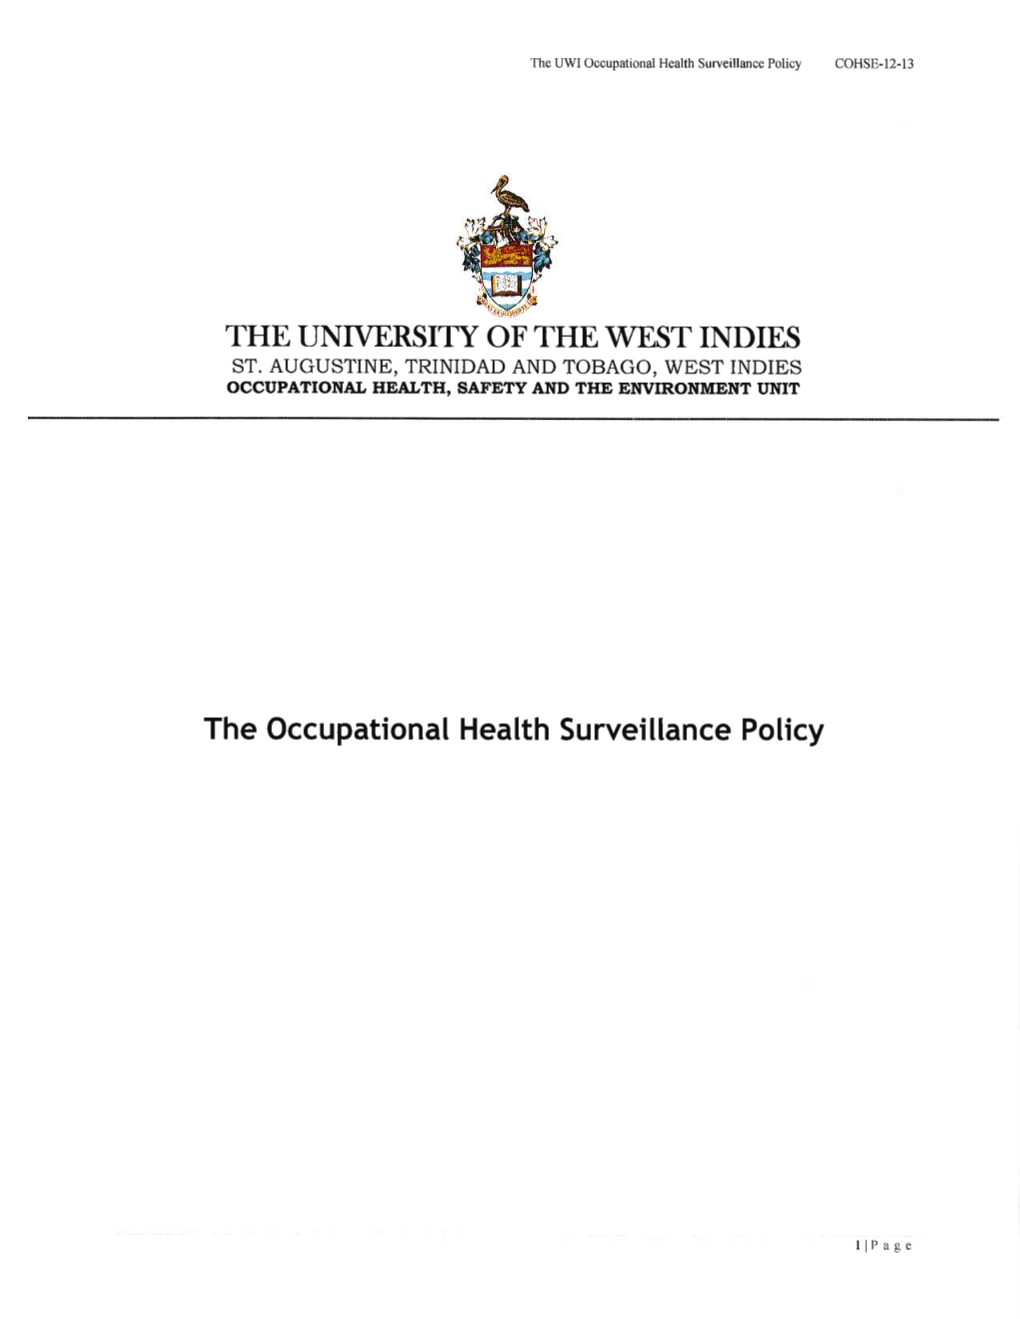 The Occupational Health Surveillance Policy